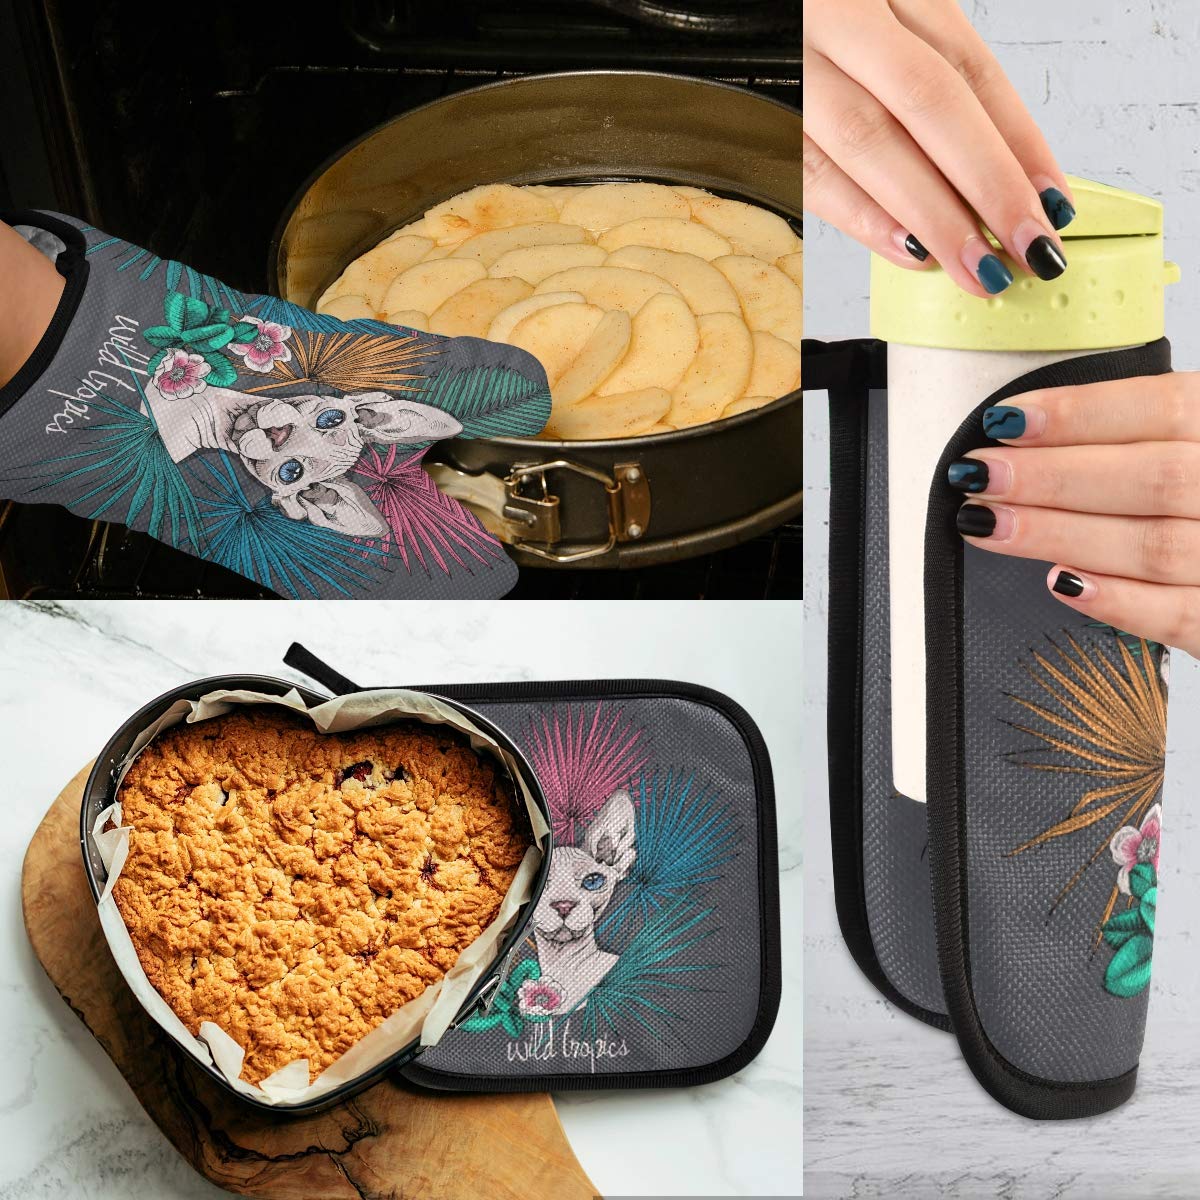 susiyo Oven Mitts and Pot Holders 2 Piece Set Sphynx Cat Tropical Leaves Heat Resistant Oven Gloves Non-Slip Textured Potholder for Microwave BBQ Cooking Baking Grilling